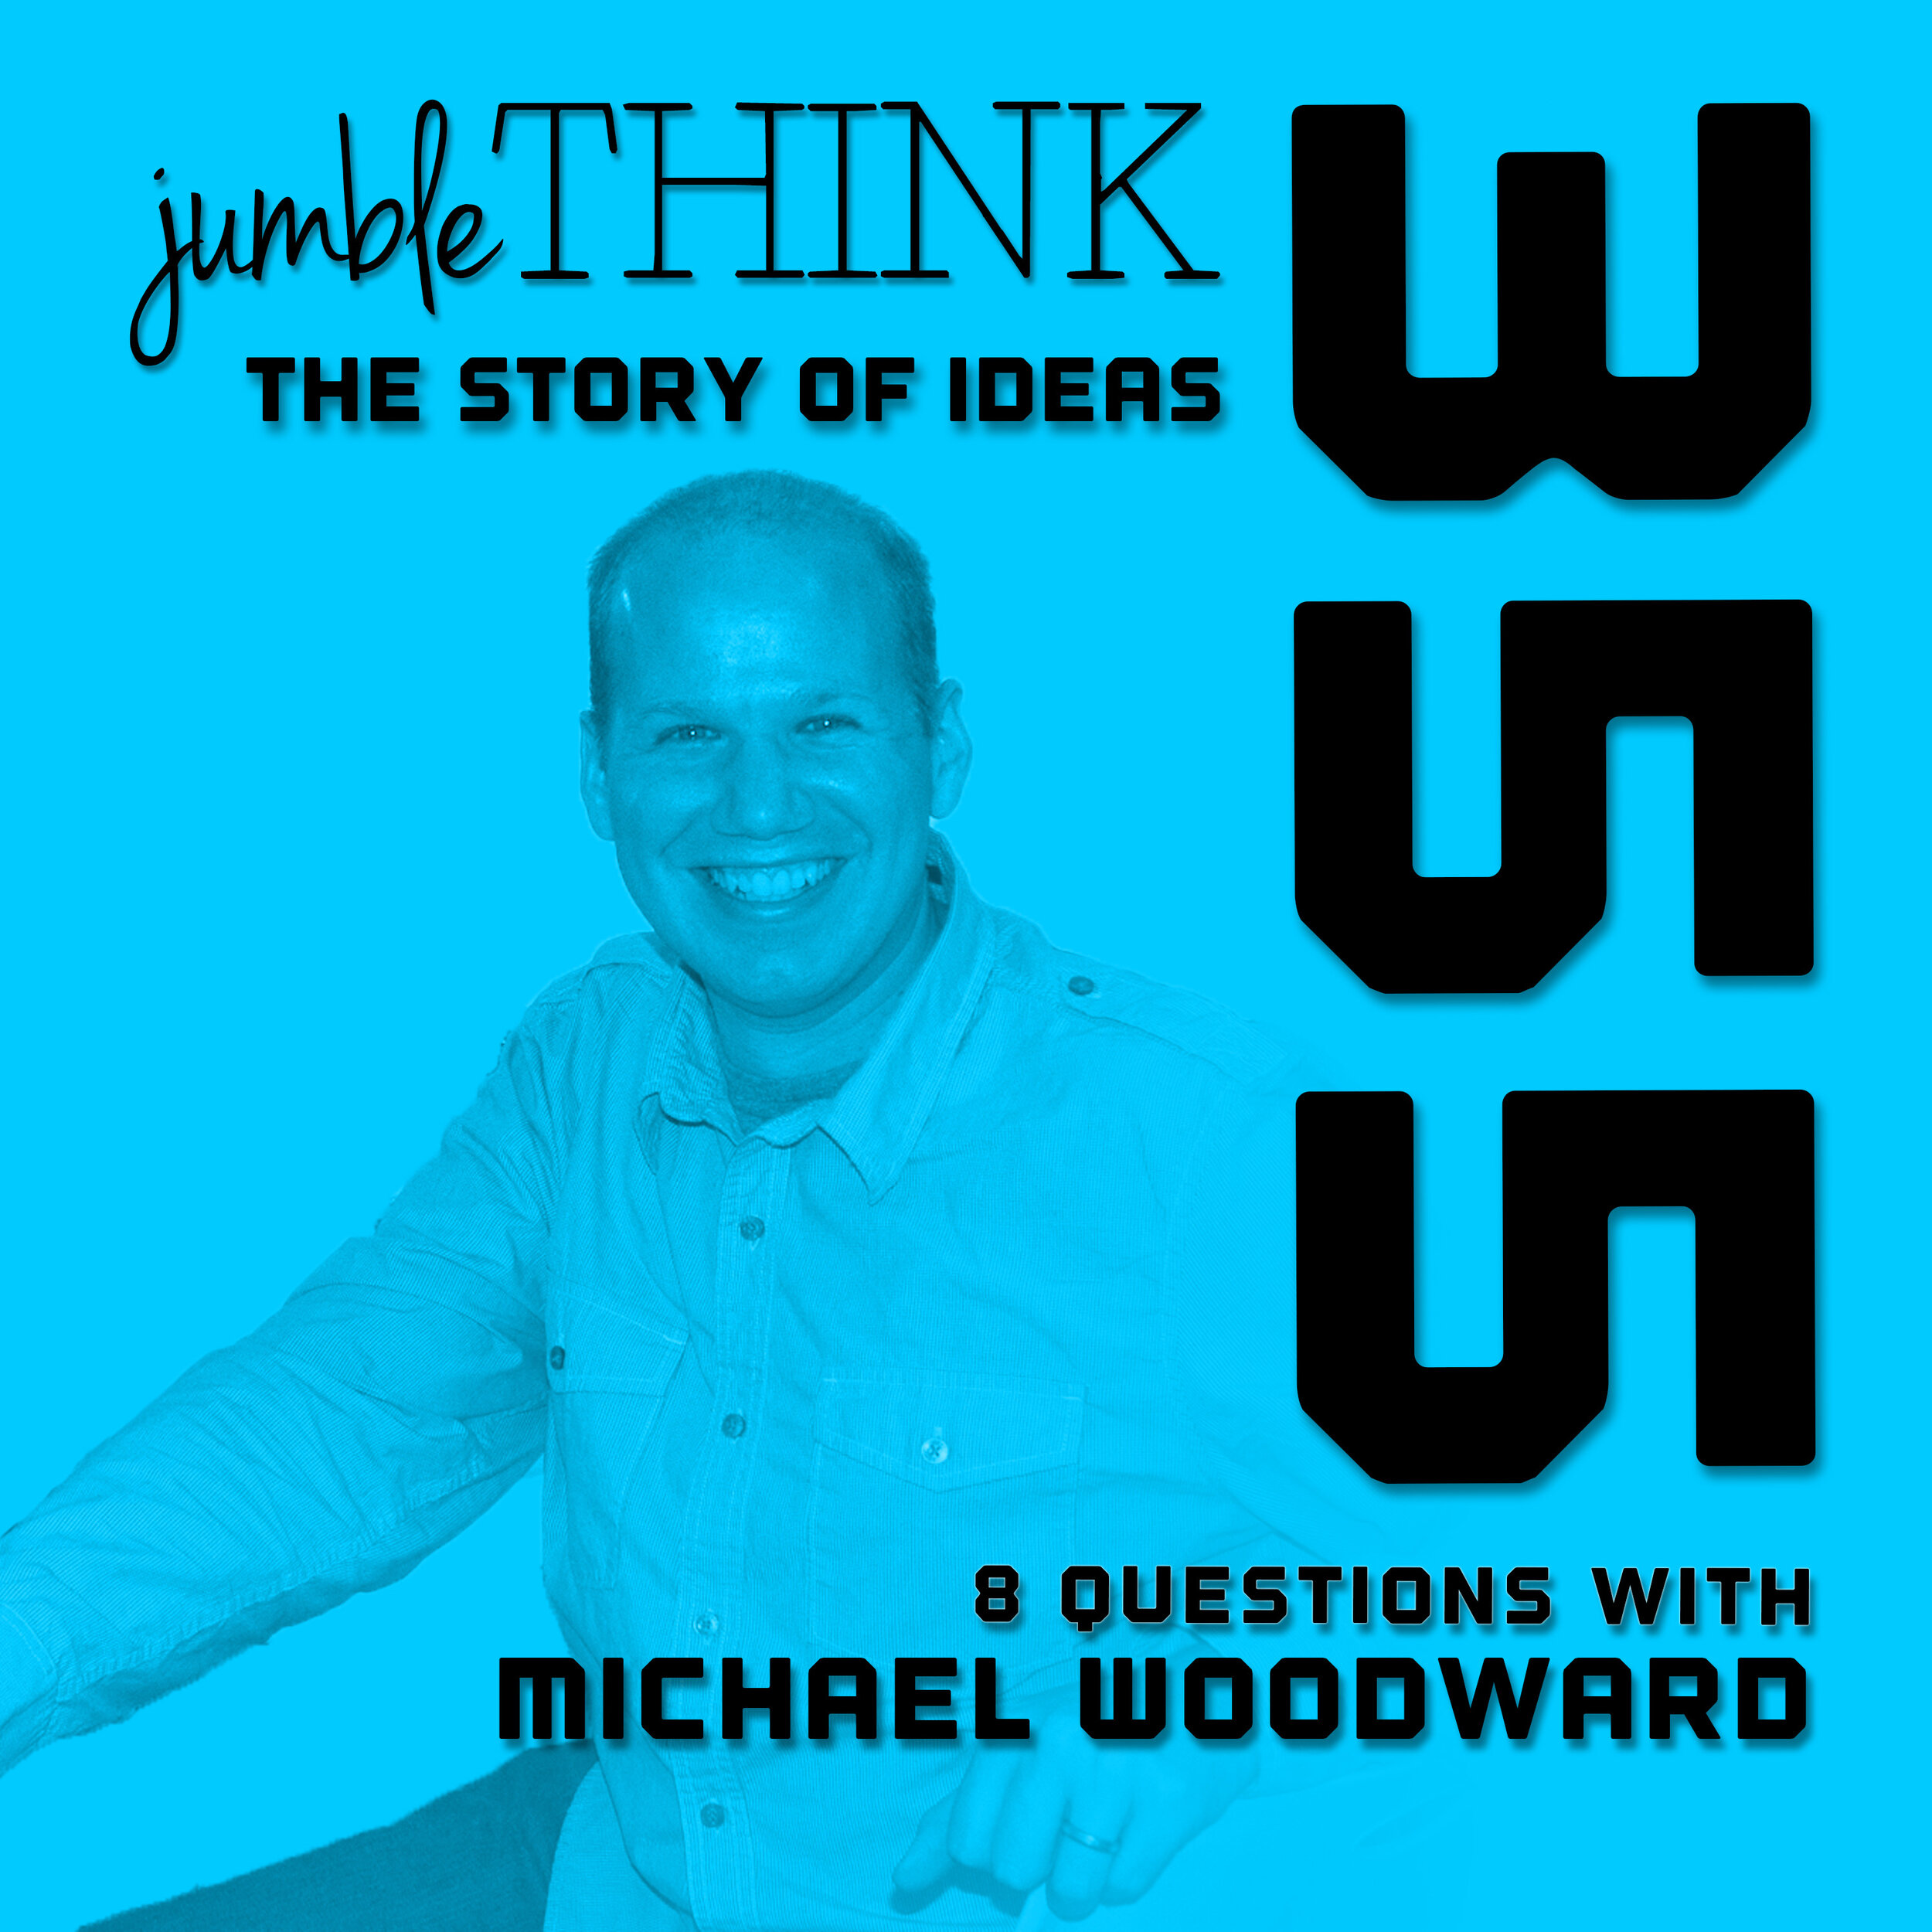 8 Questions with Michael Woodward